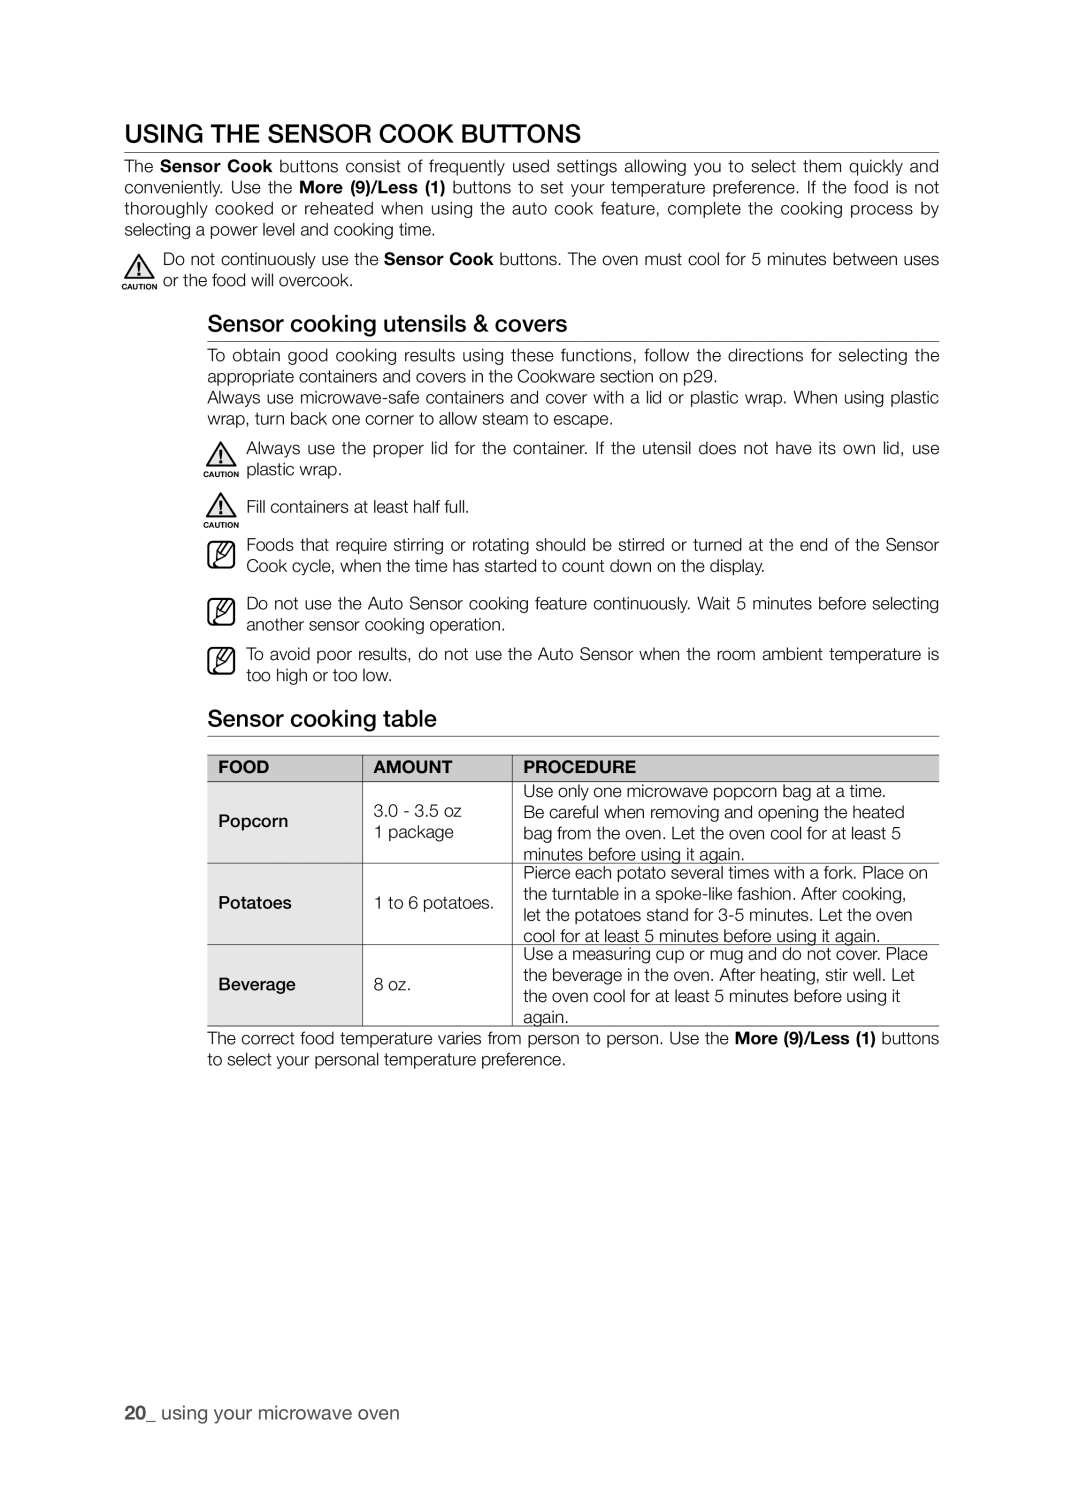 Samsung SMH8165STG user manual Using the Sensor Cook buttons, using your microwave oven, Food, Amount, Procedure 